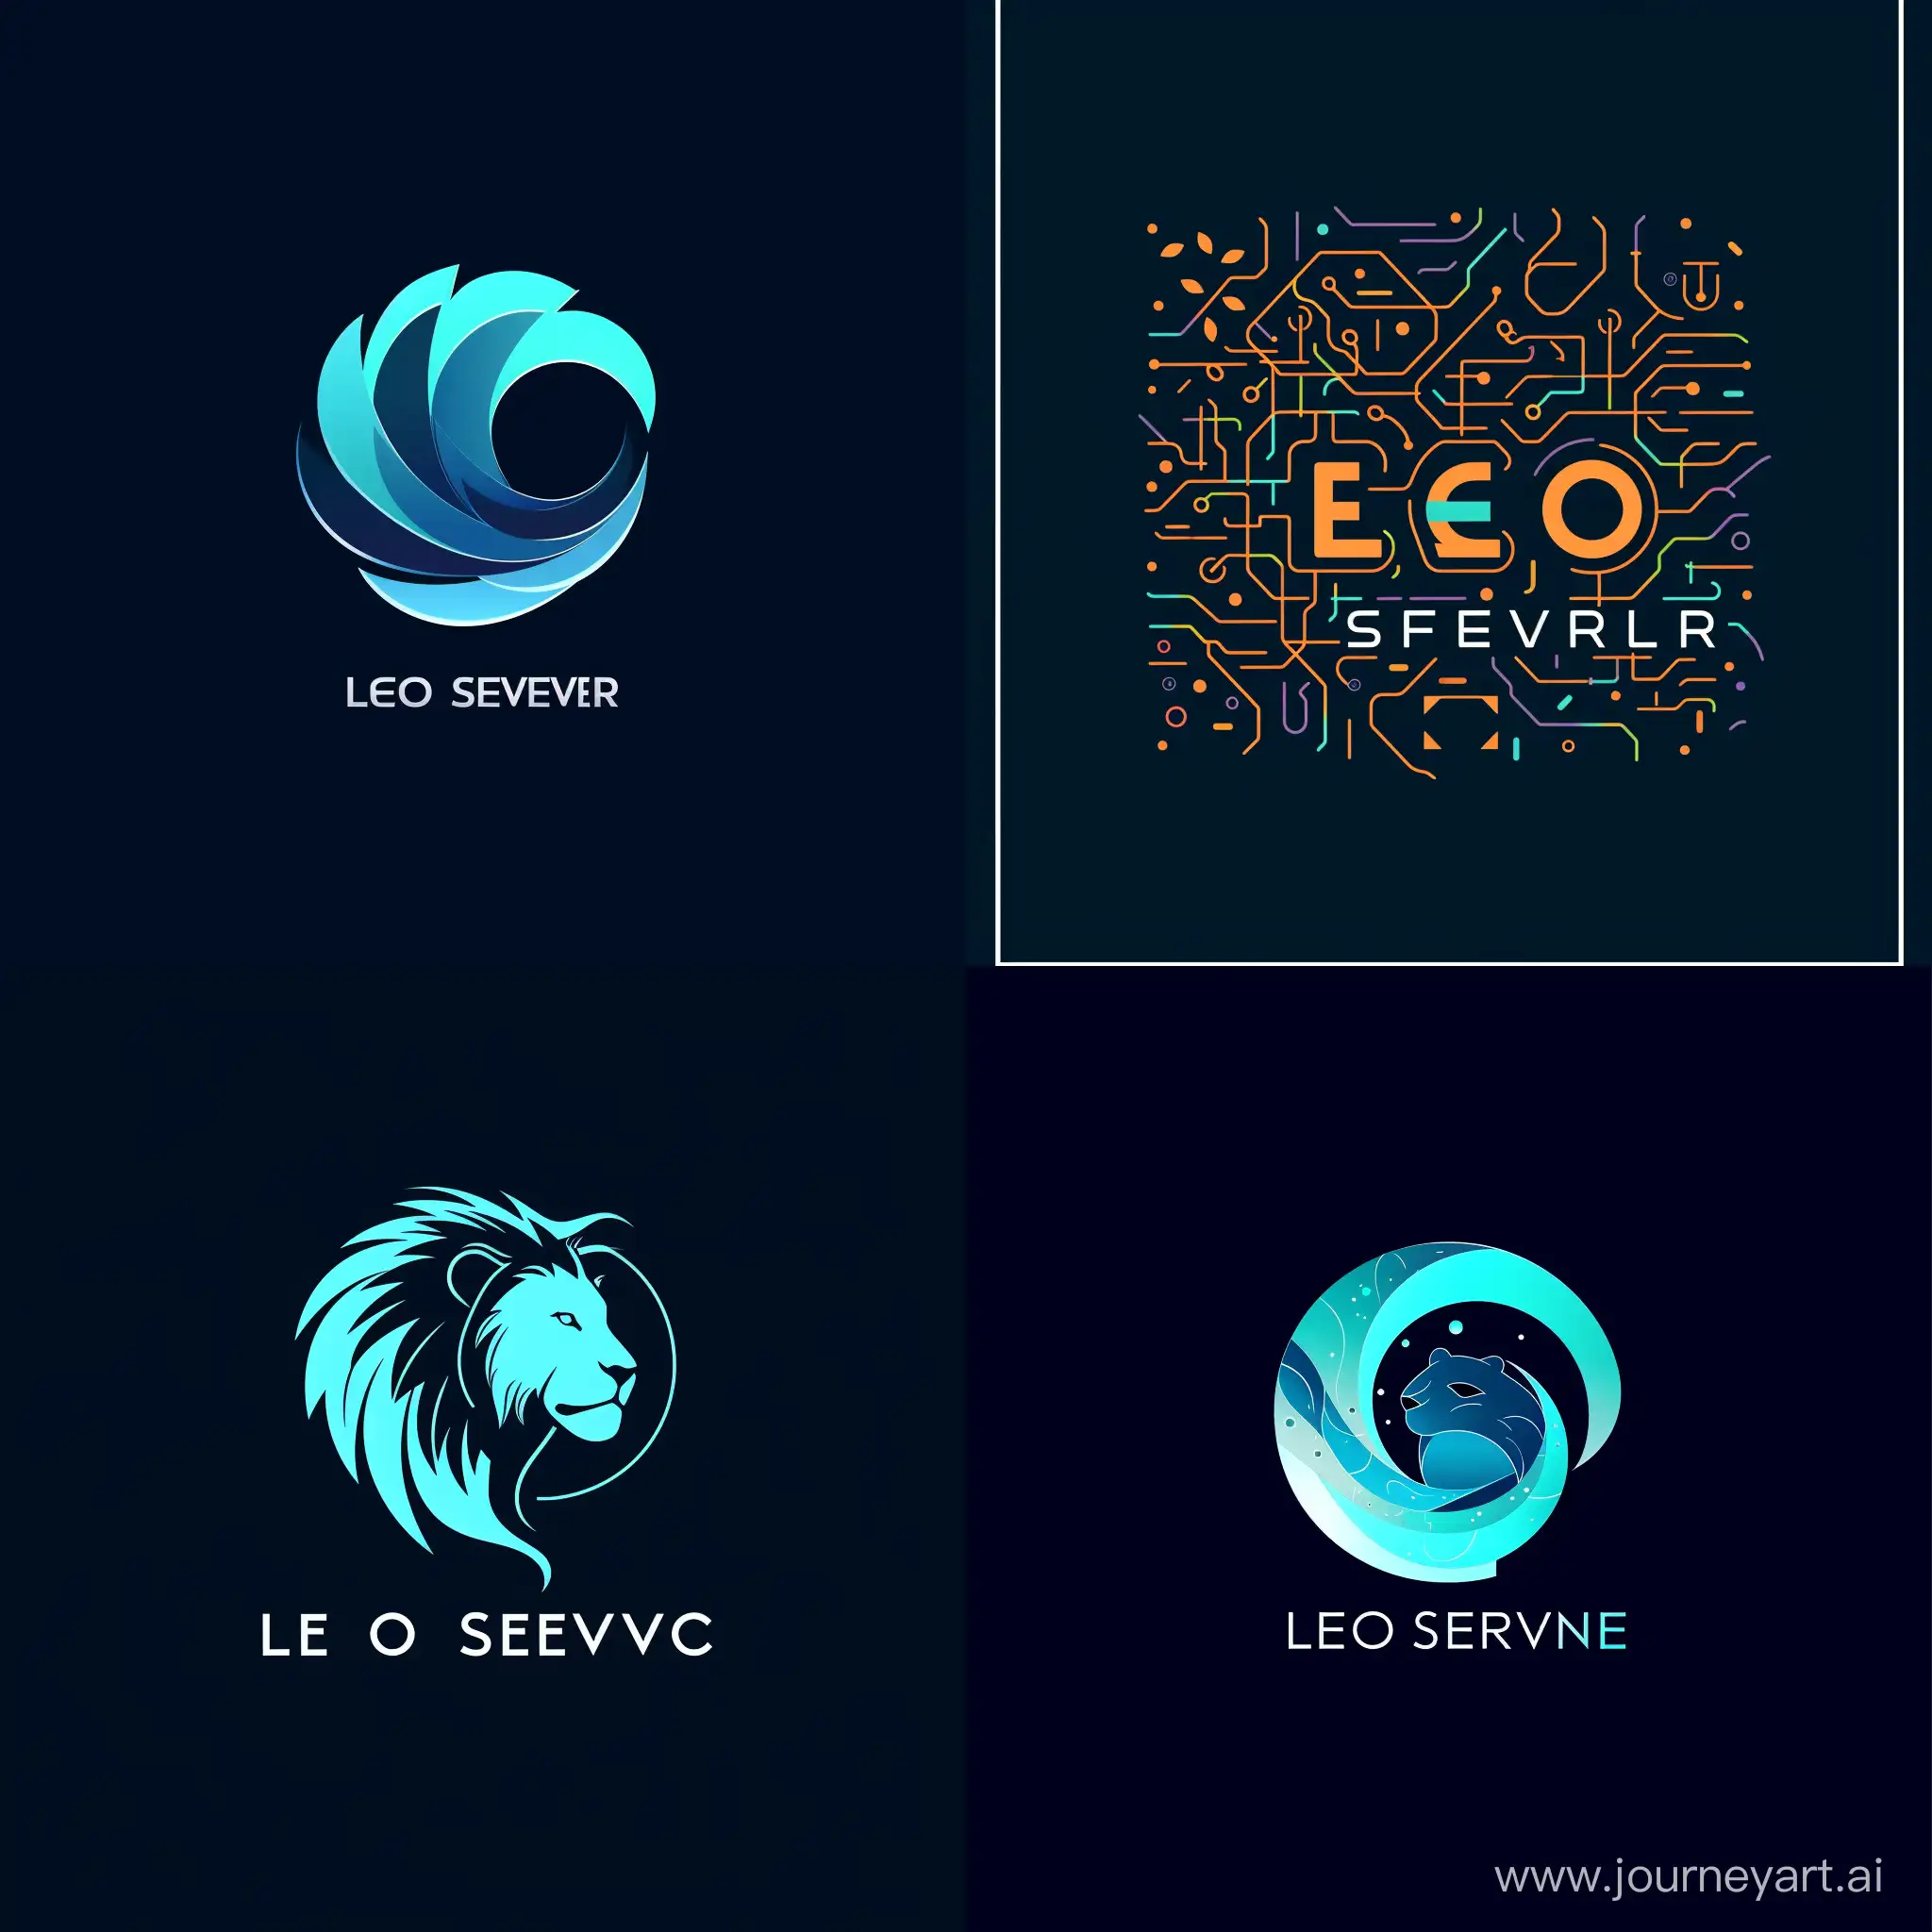 Leo-Service-Technology-and-Biomedical-Logo-Design-with-Vector-Graphics